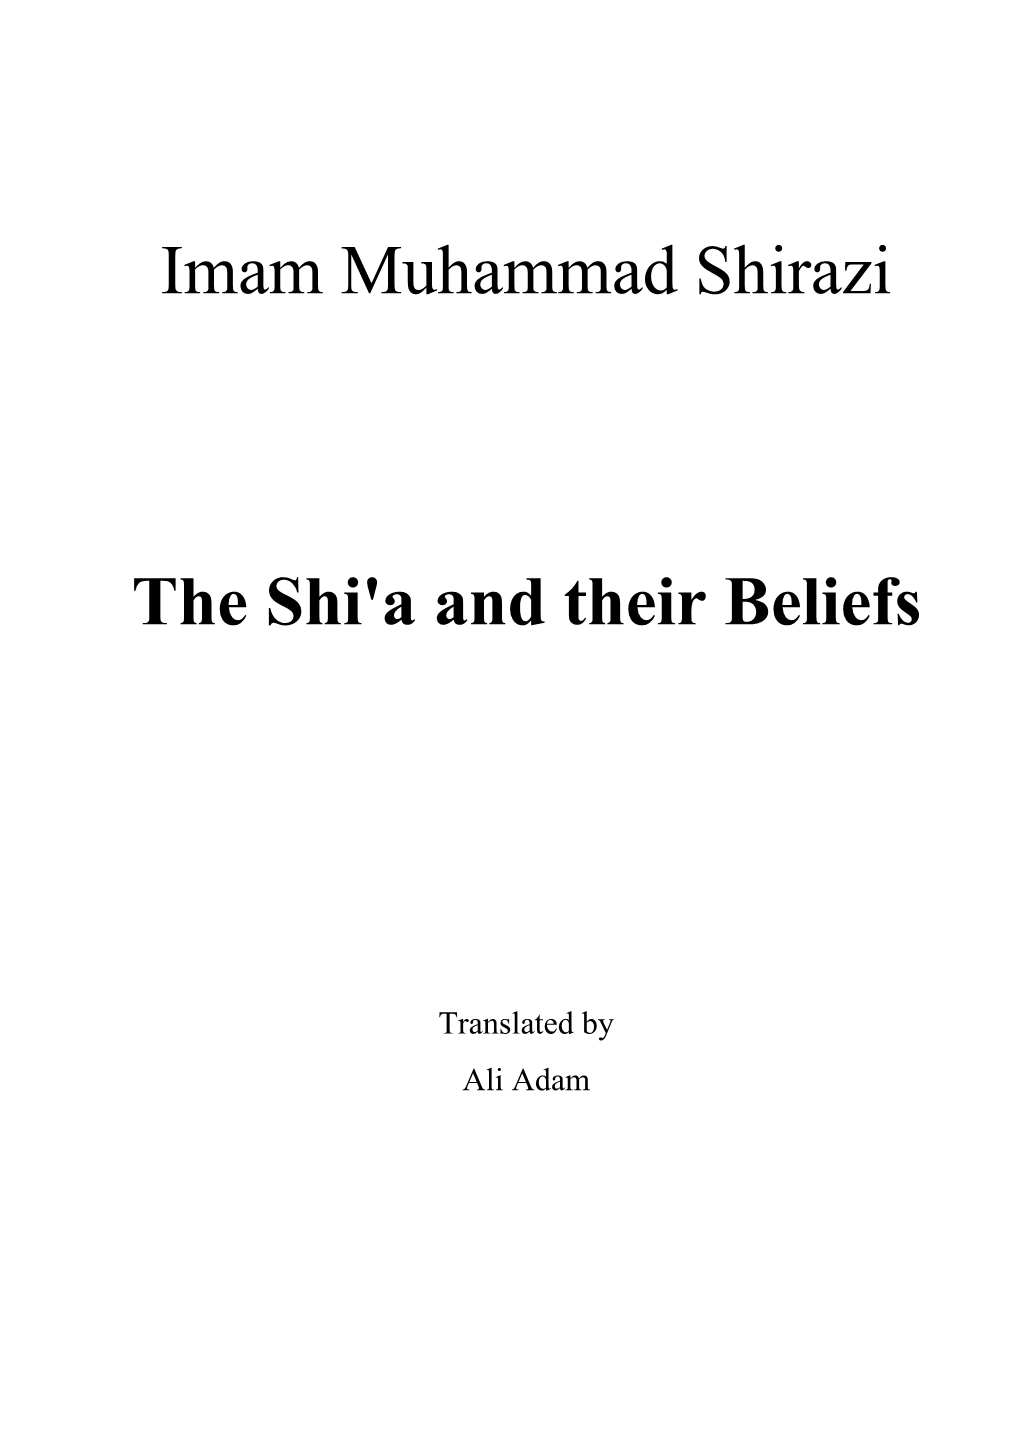 Imam Muhammad Shirazi the Shi'a and Their Beliefs